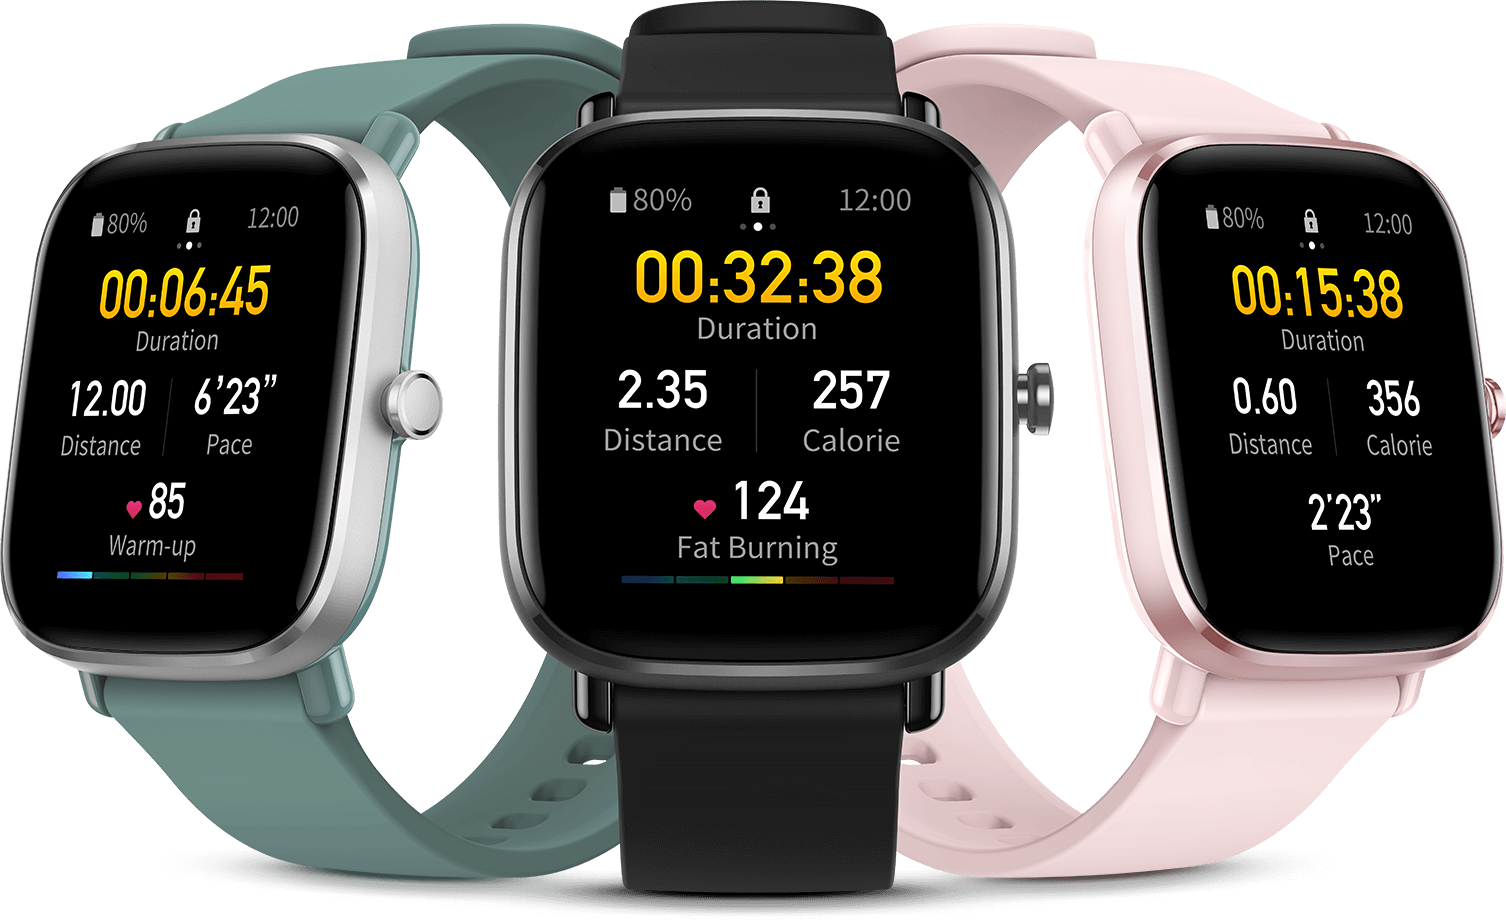 Super light, the Amazfit GTS 2 mini is on sale with the value of R$ 493.07 